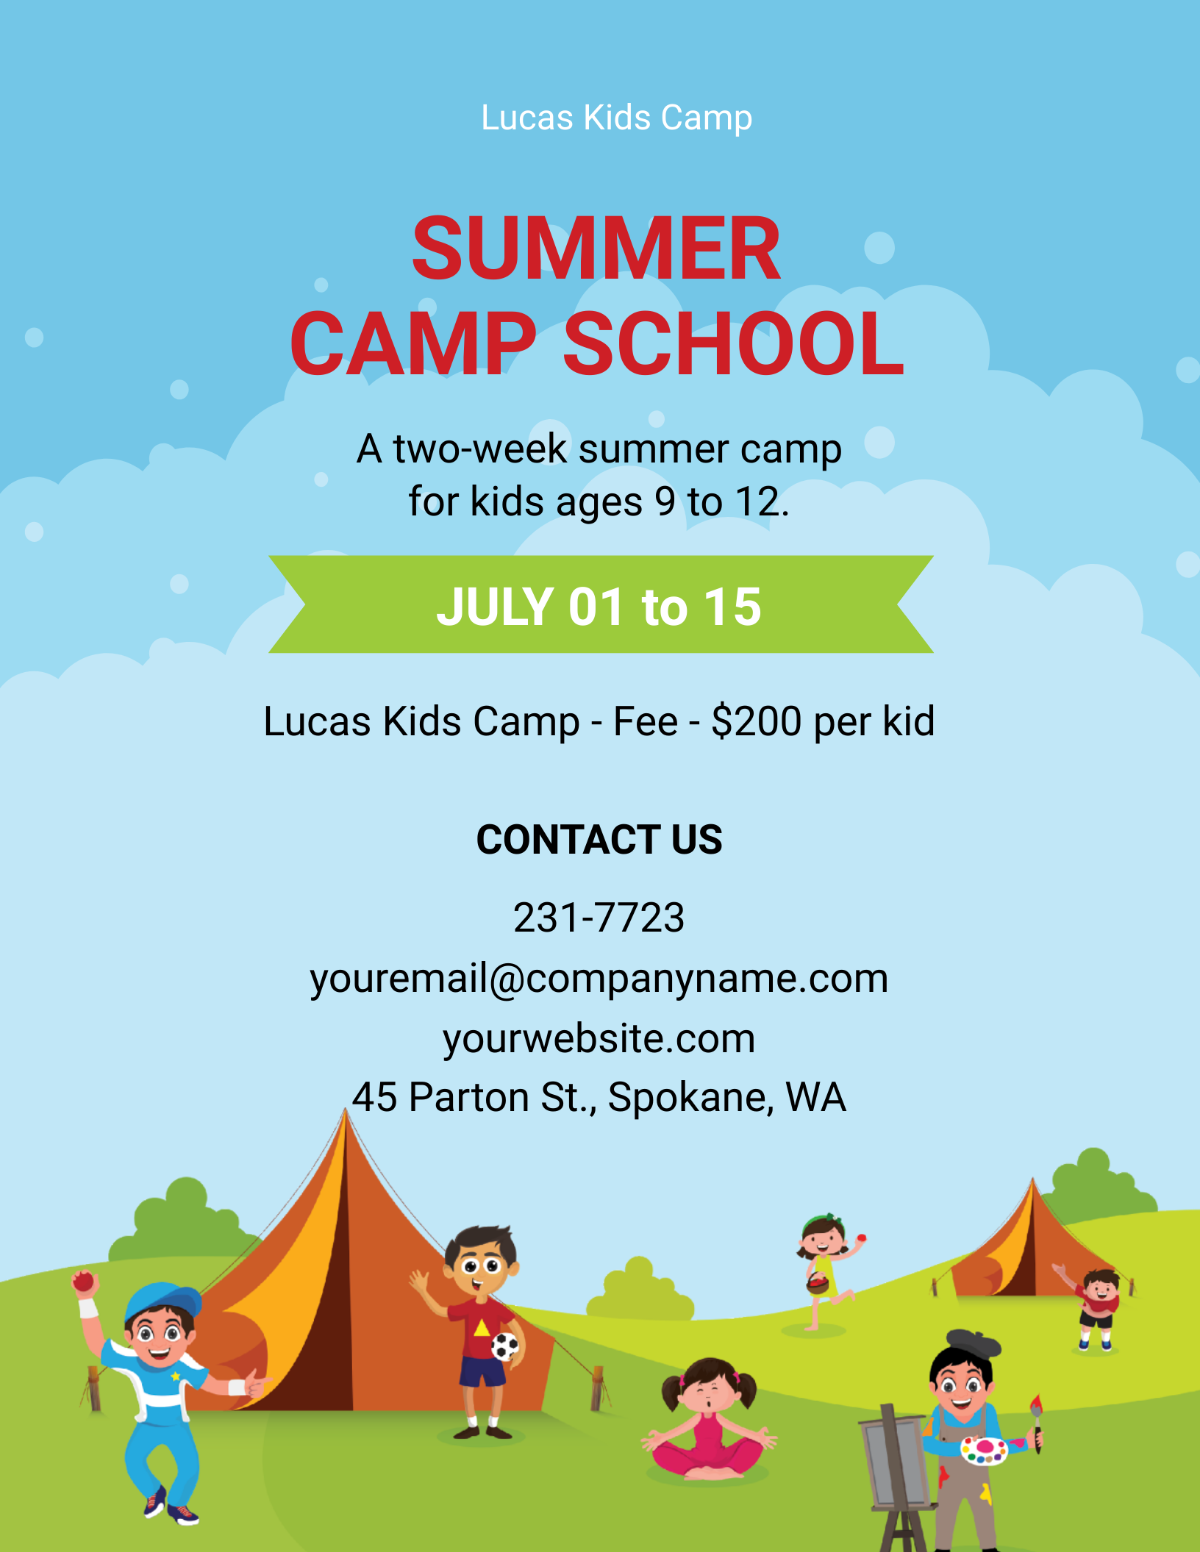 Summer Camp School Admission Flyer Template